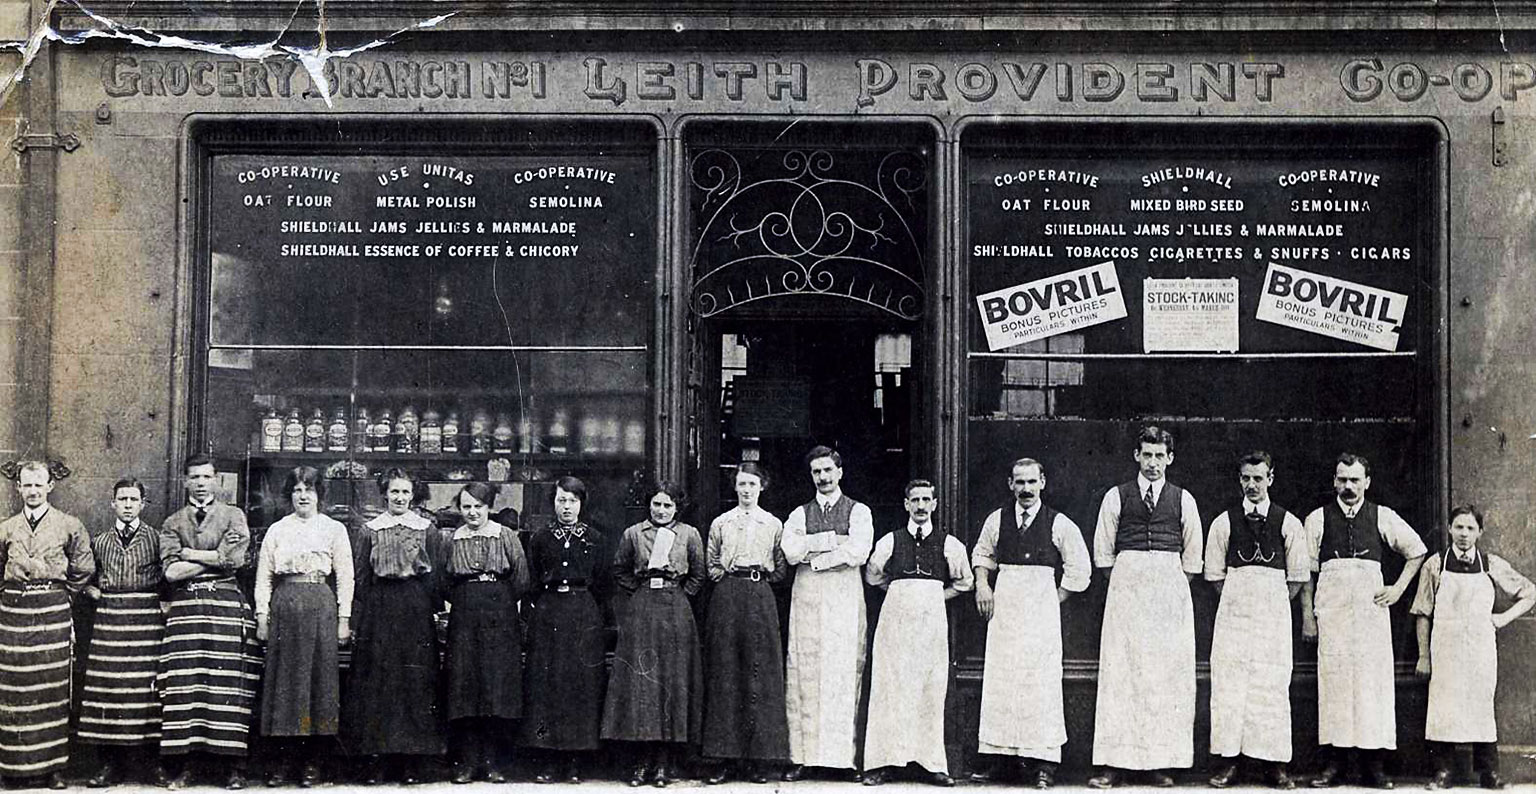 Workers at Leith Provident Co-op, Dalmeny Street, Leith